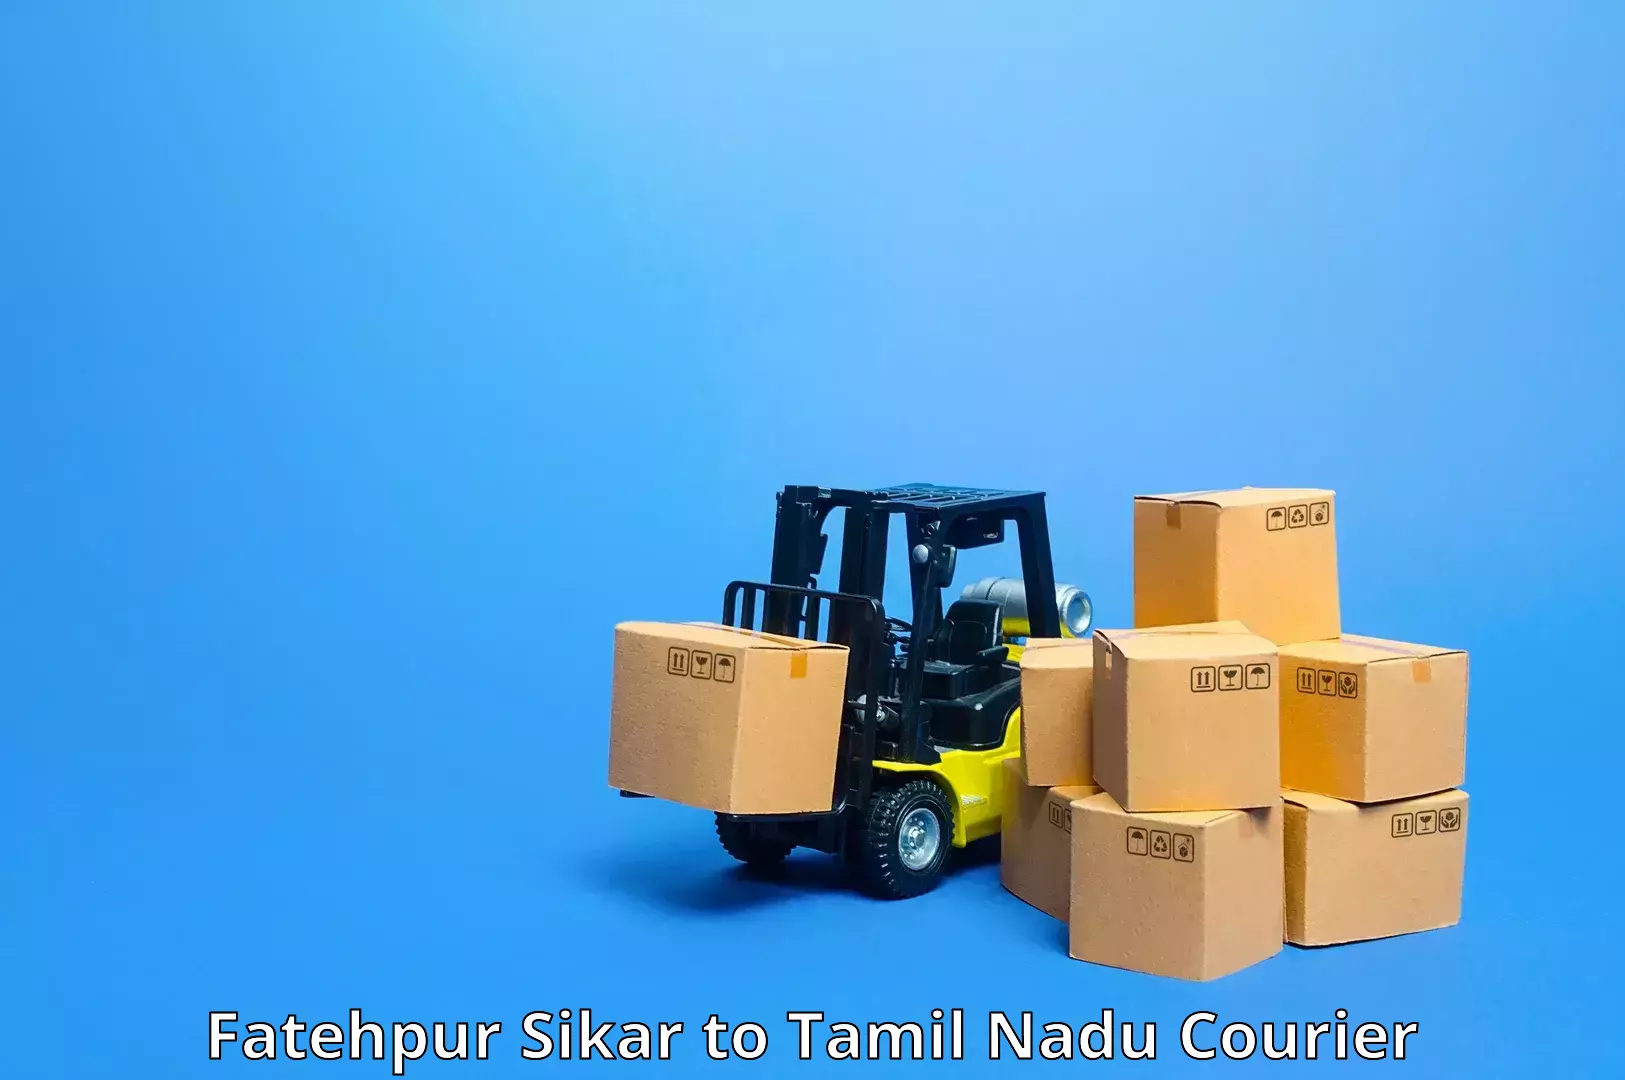 Comprehensive shipping network Fatehpur Sikar to Chetpet